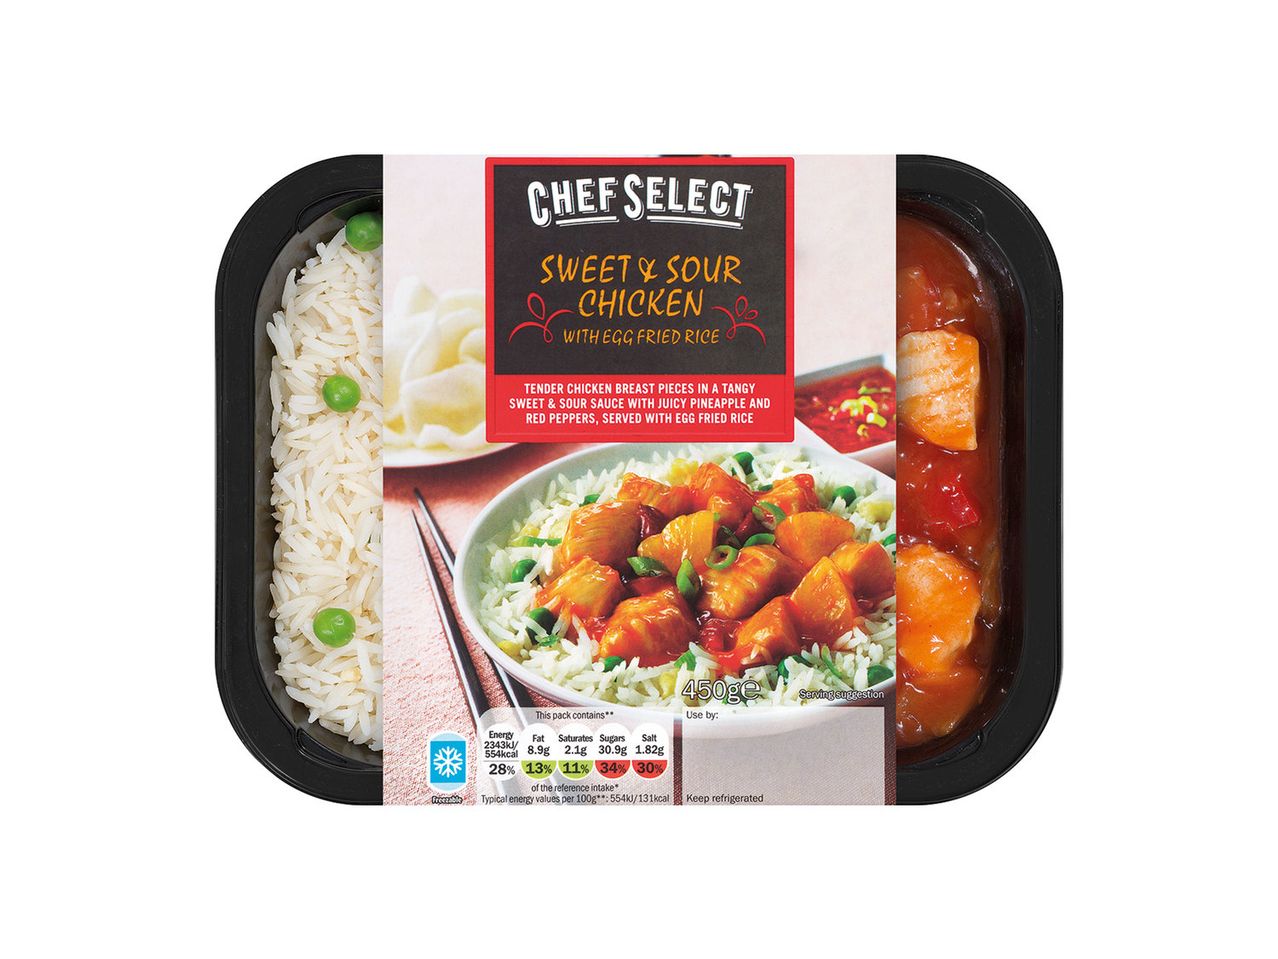 Go to full screen view: Chef Select Sweet & Sour Chicken with Egg Fried Rice - Image 1